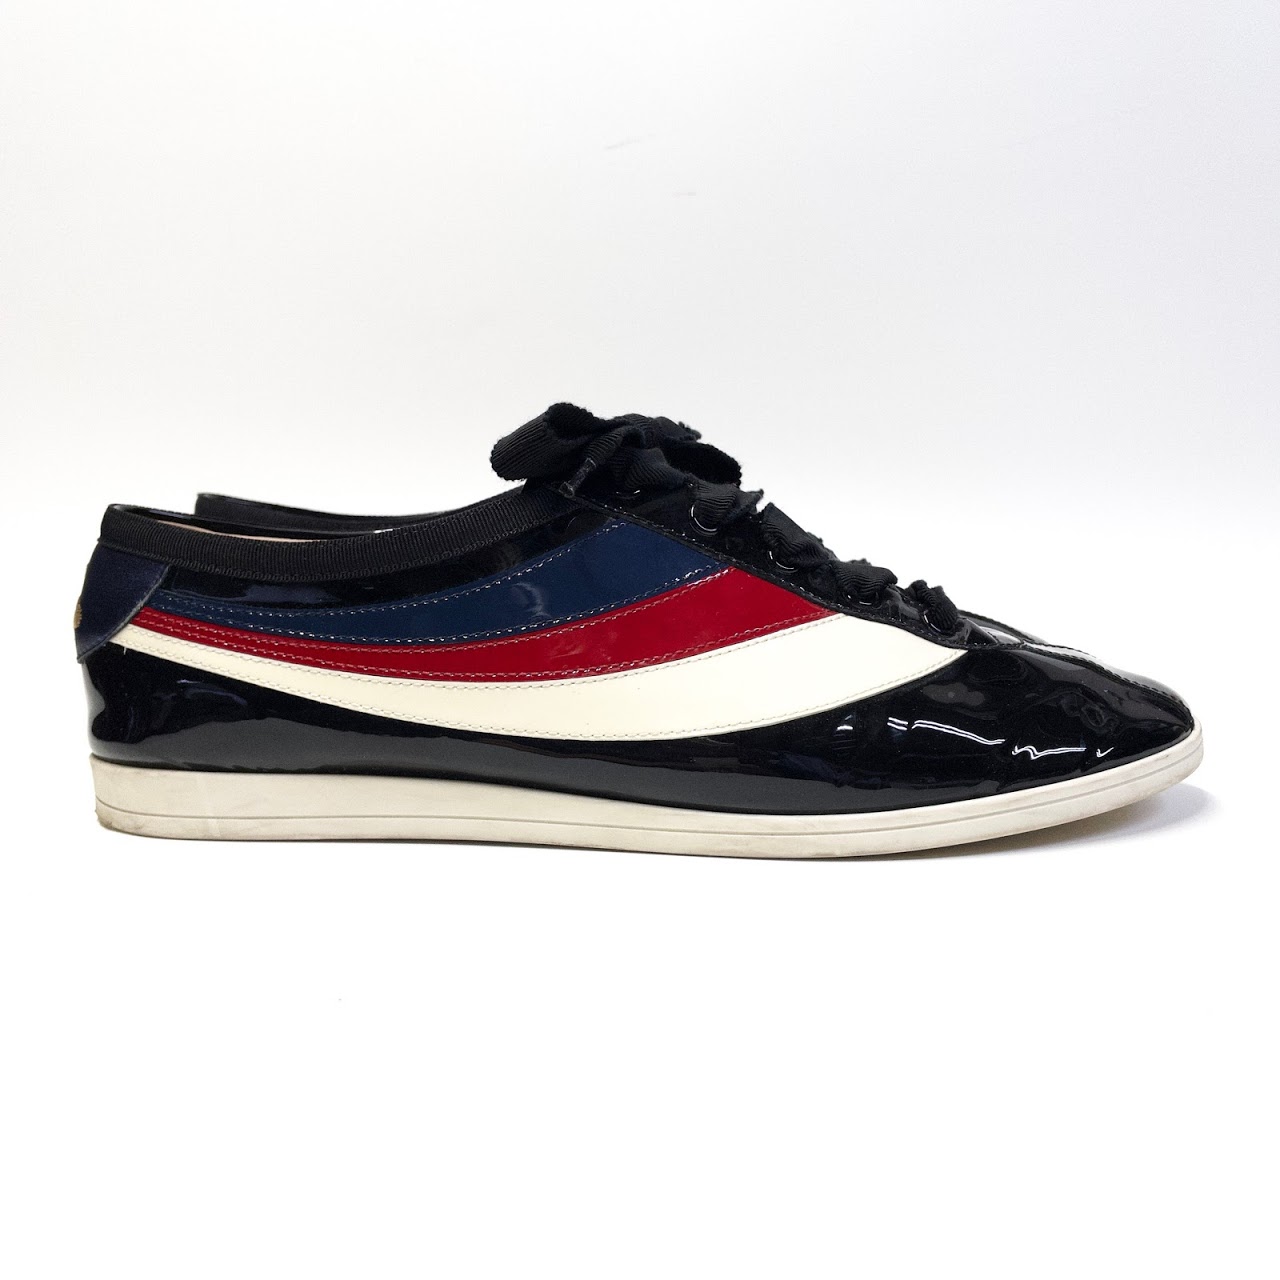 Gucci Falacer Hebron Ace Web Patent Leather Sneakers